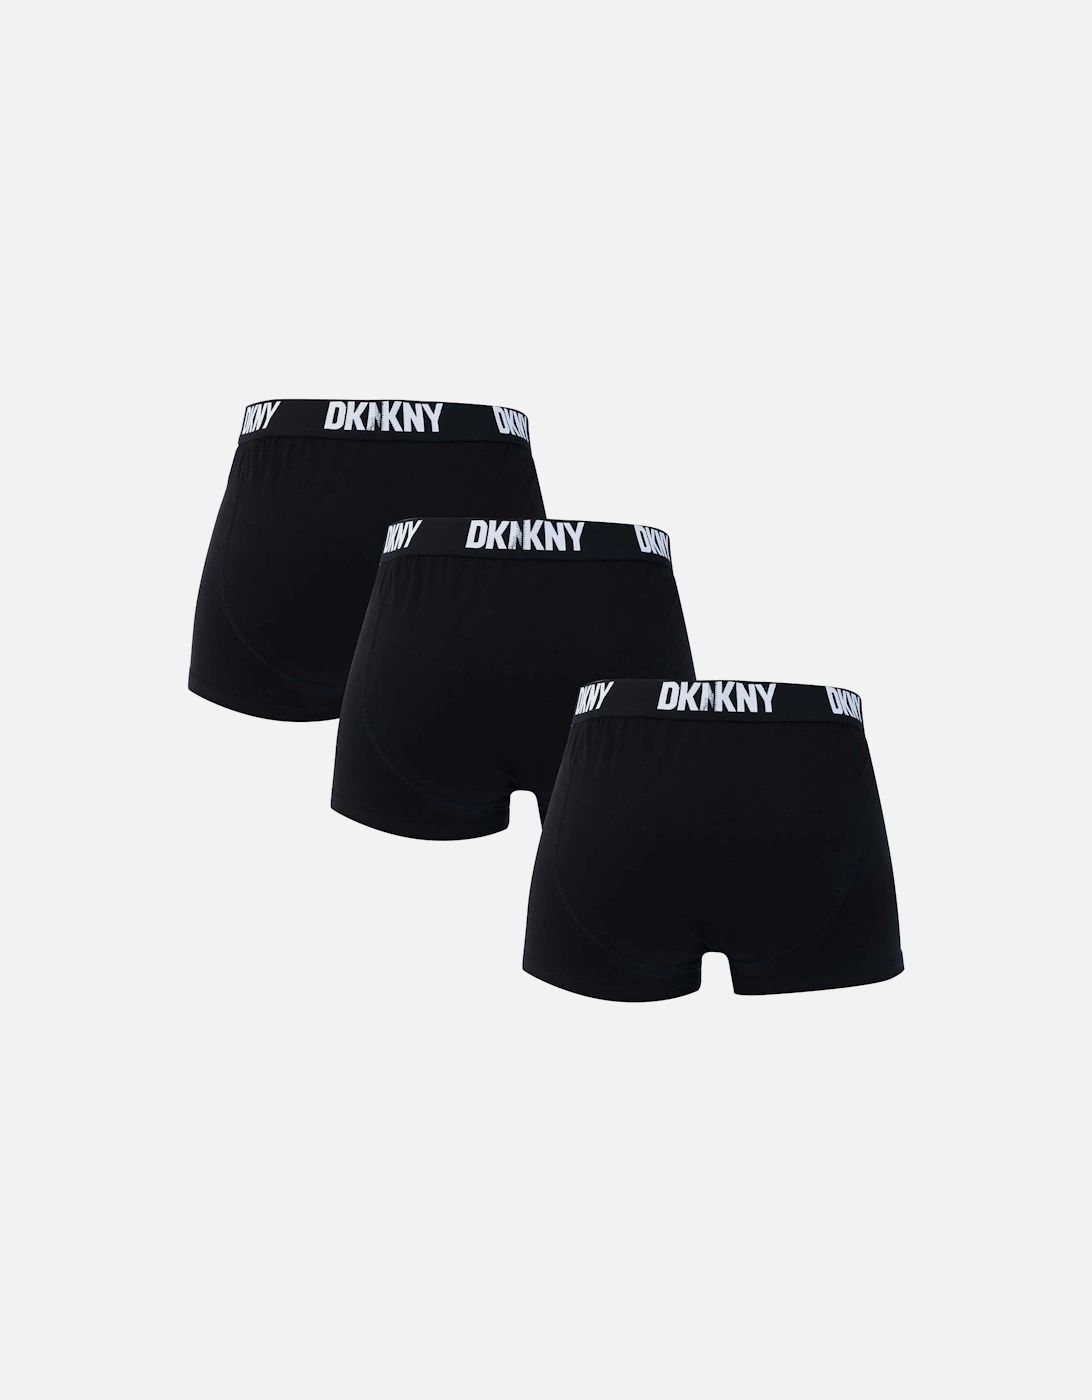 Mens Seattle 3 pack Trunk Boxer Shorts